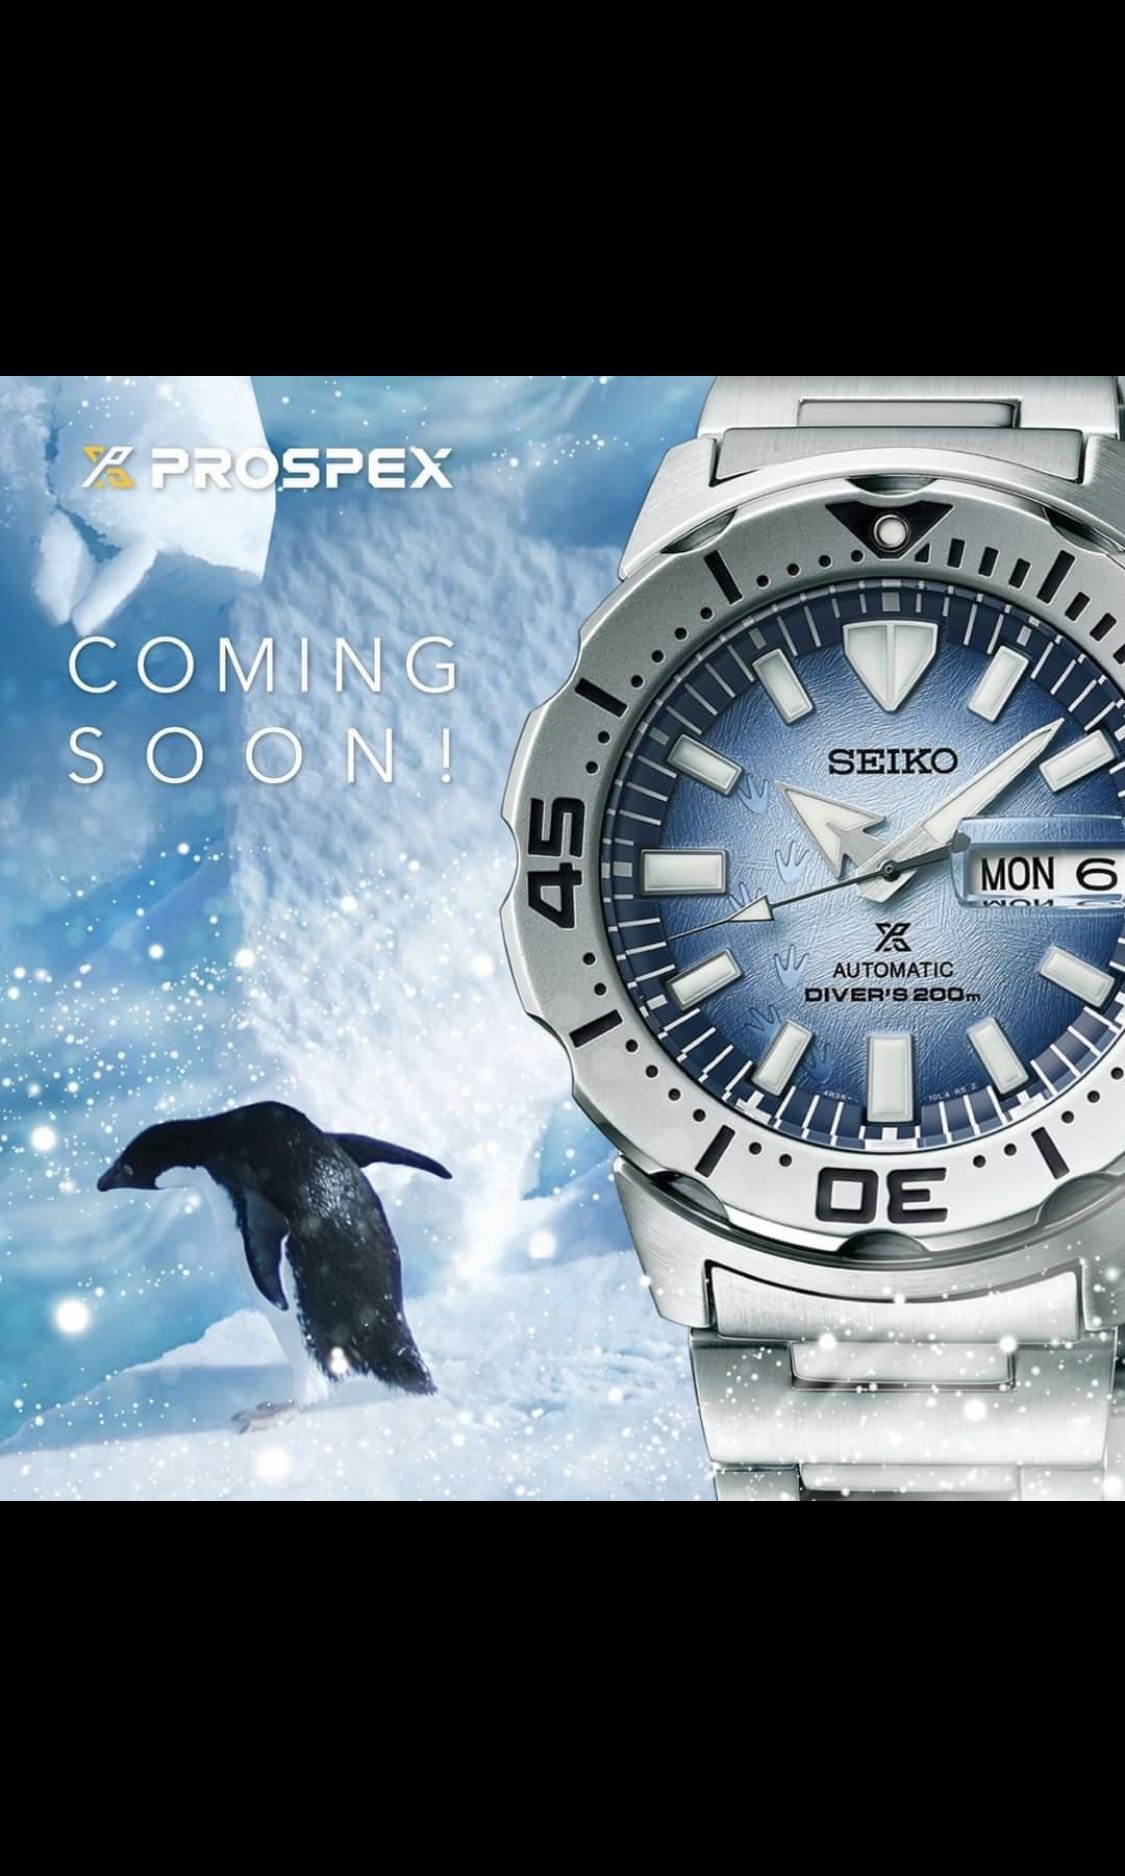 Seiko Monster Limited Edition, Men's Fashion, Watches & Accessories ...